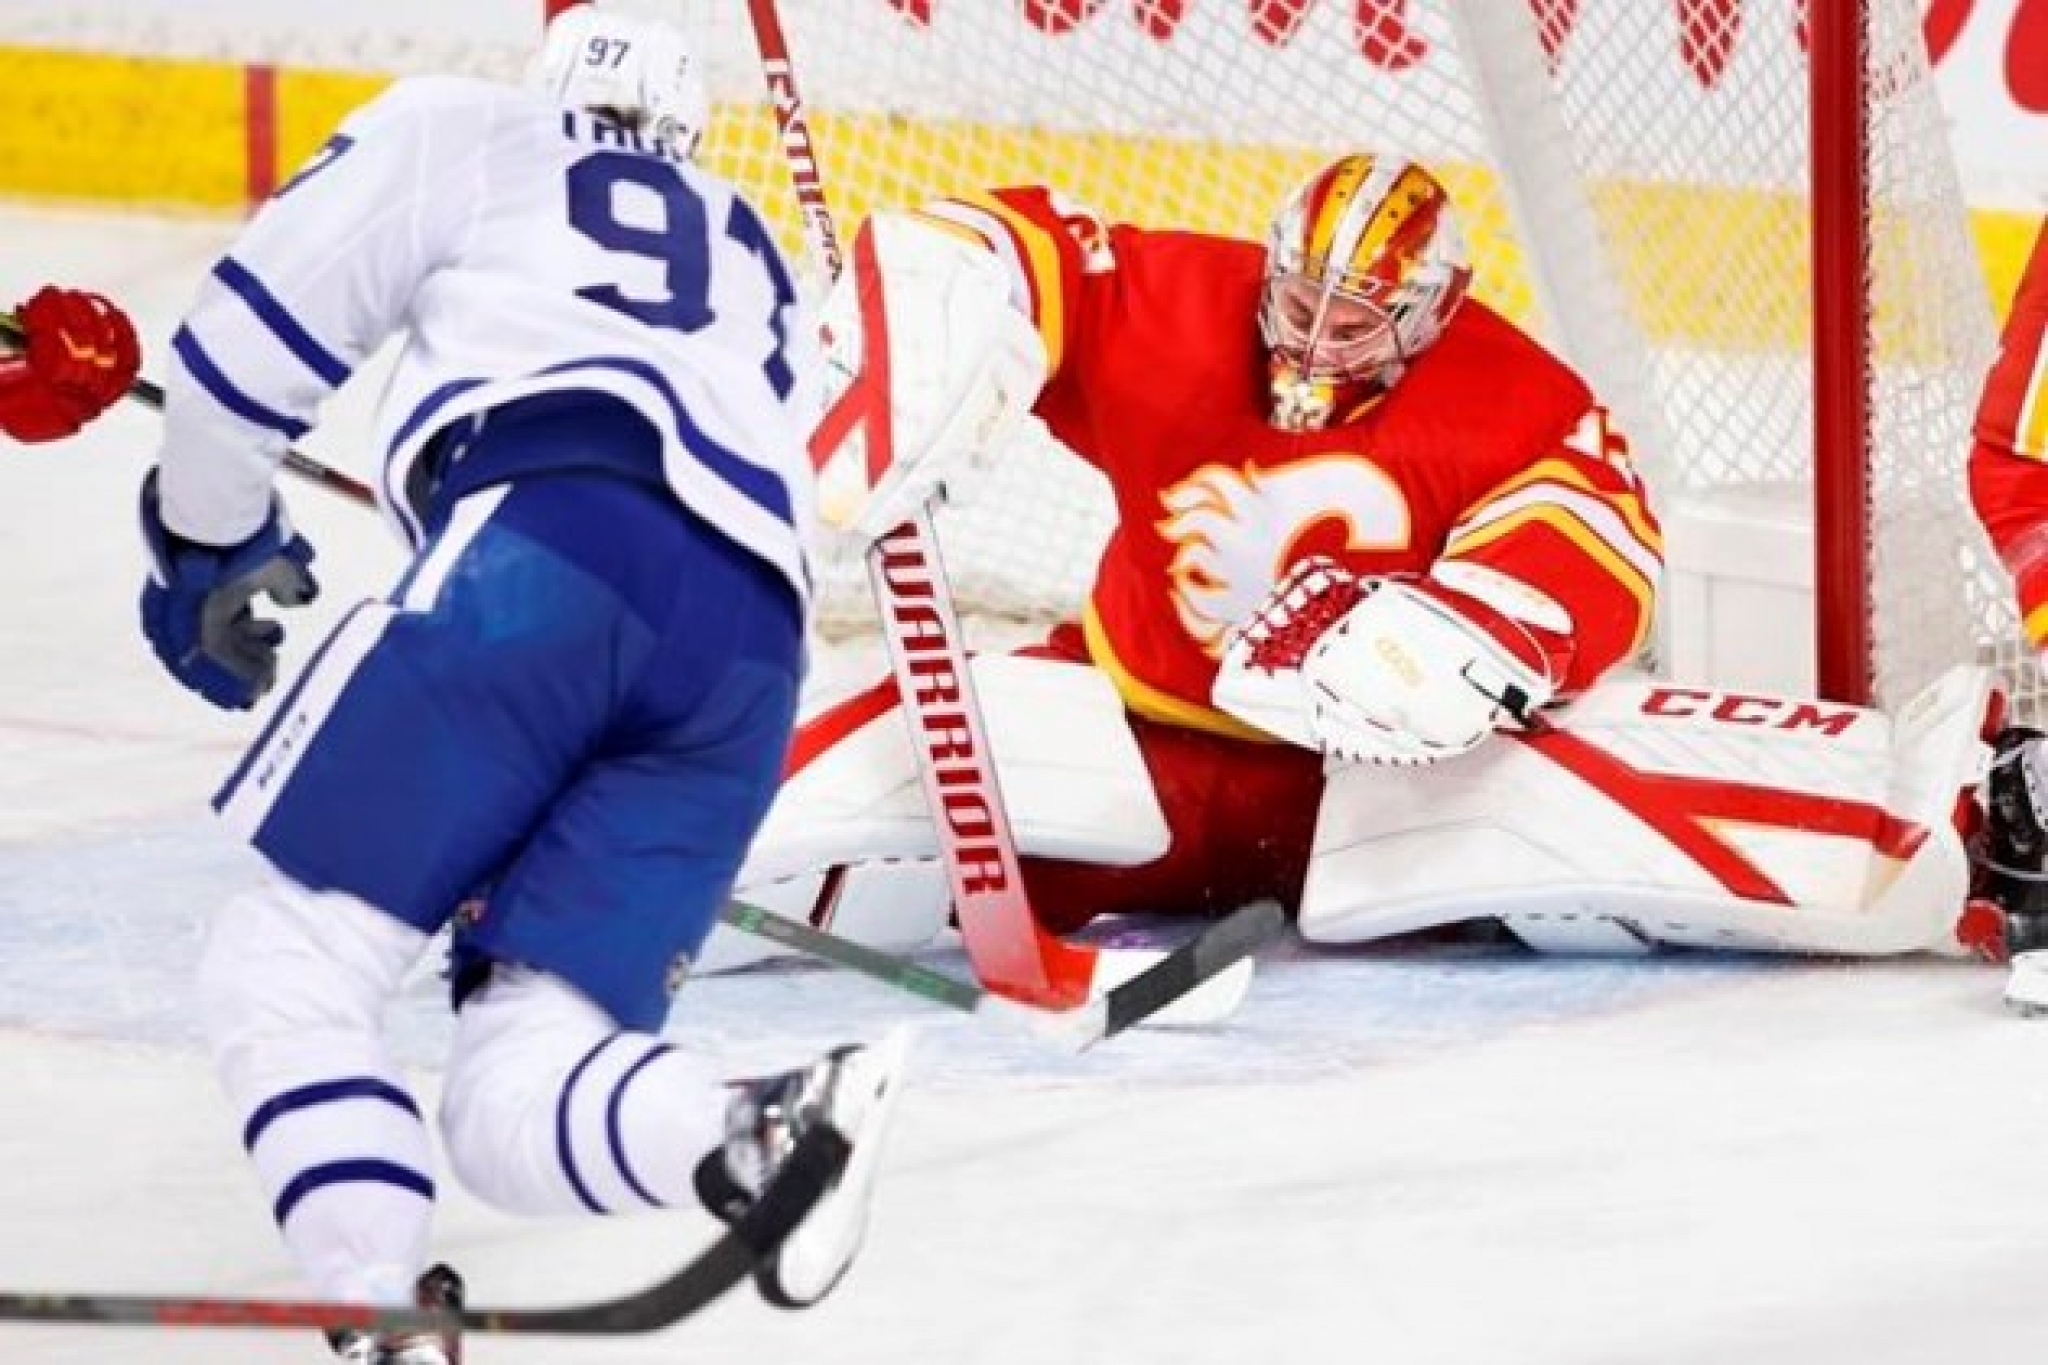 Matthews, Tavares score third-period goals for Maple Leafs in 4-2 win over Flames